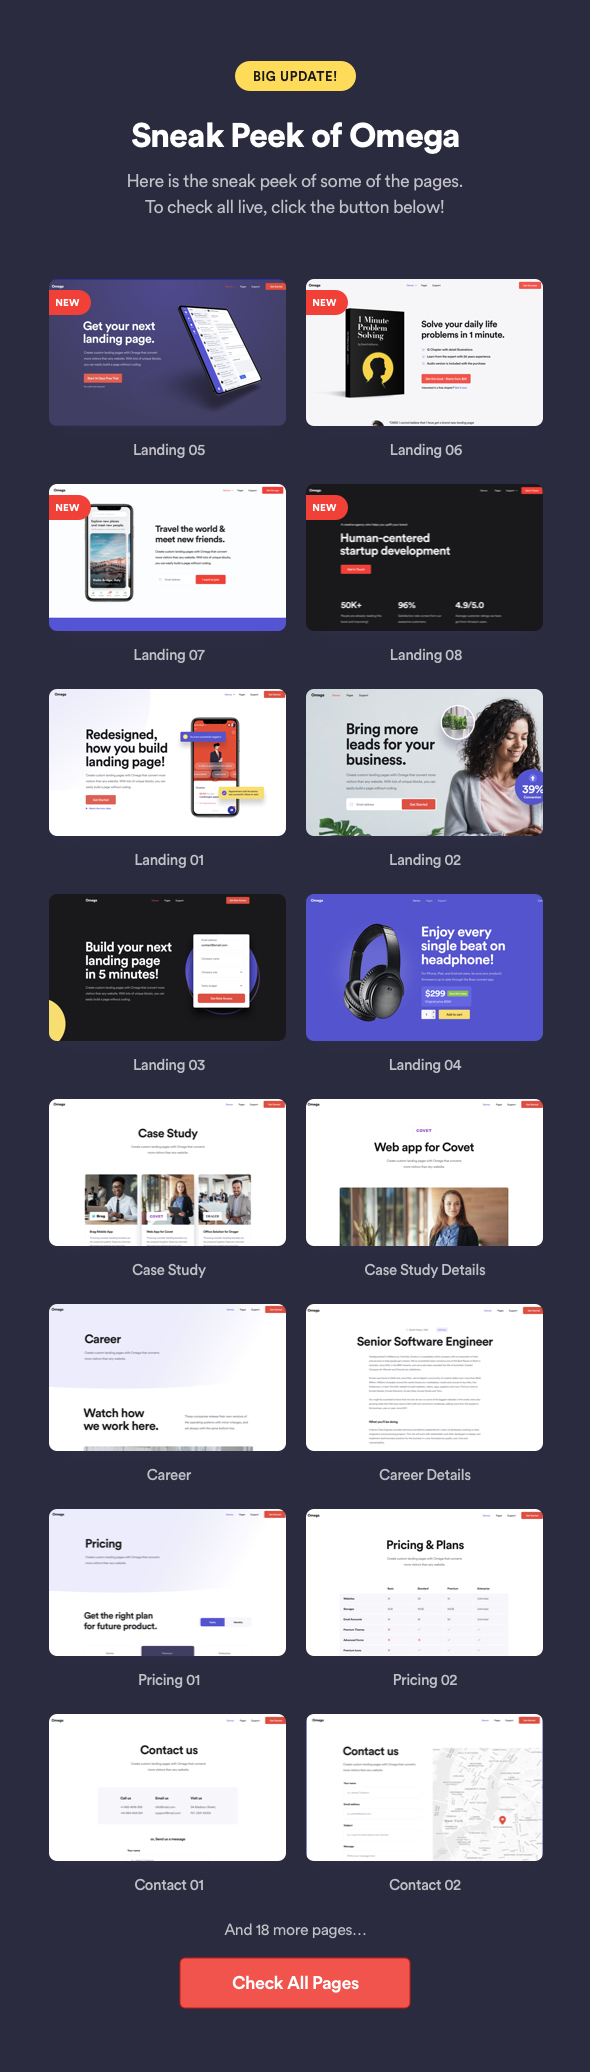 Omega - Landing Page Template for SaaS, Startup & Agency - 7